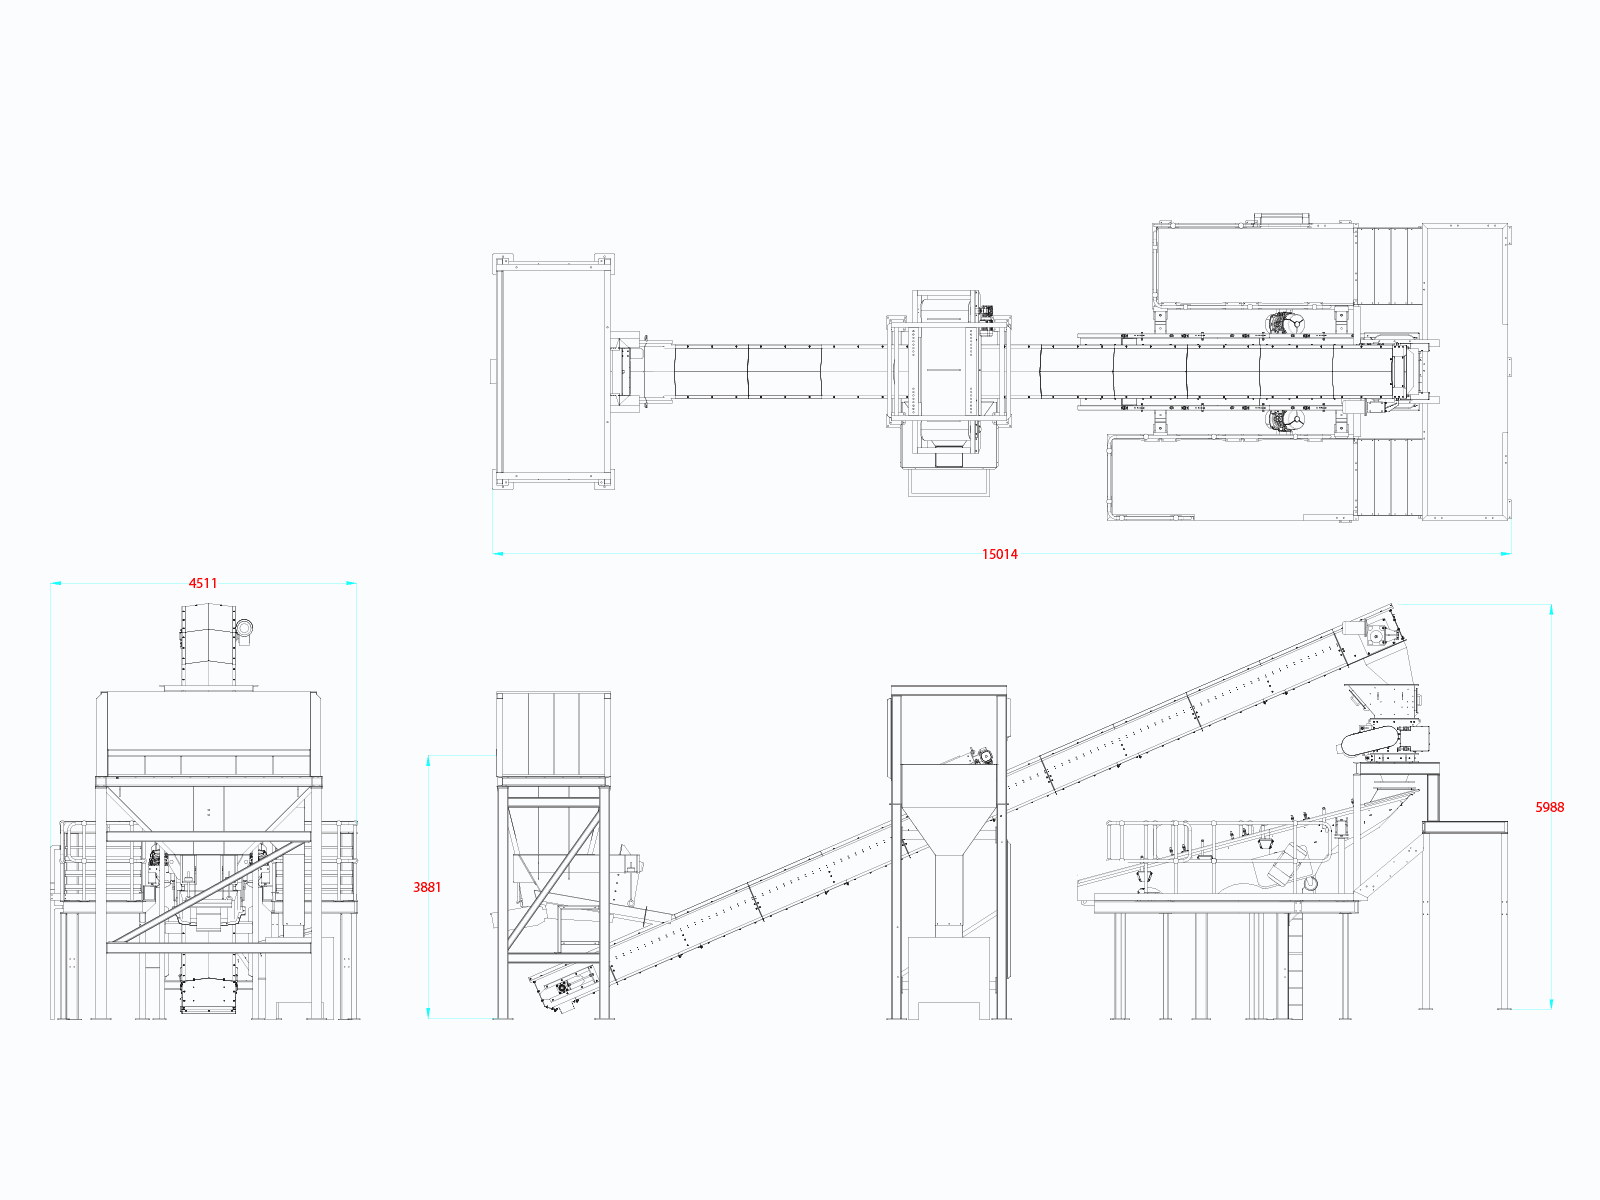 K500-C-SC glass processing system dimensions